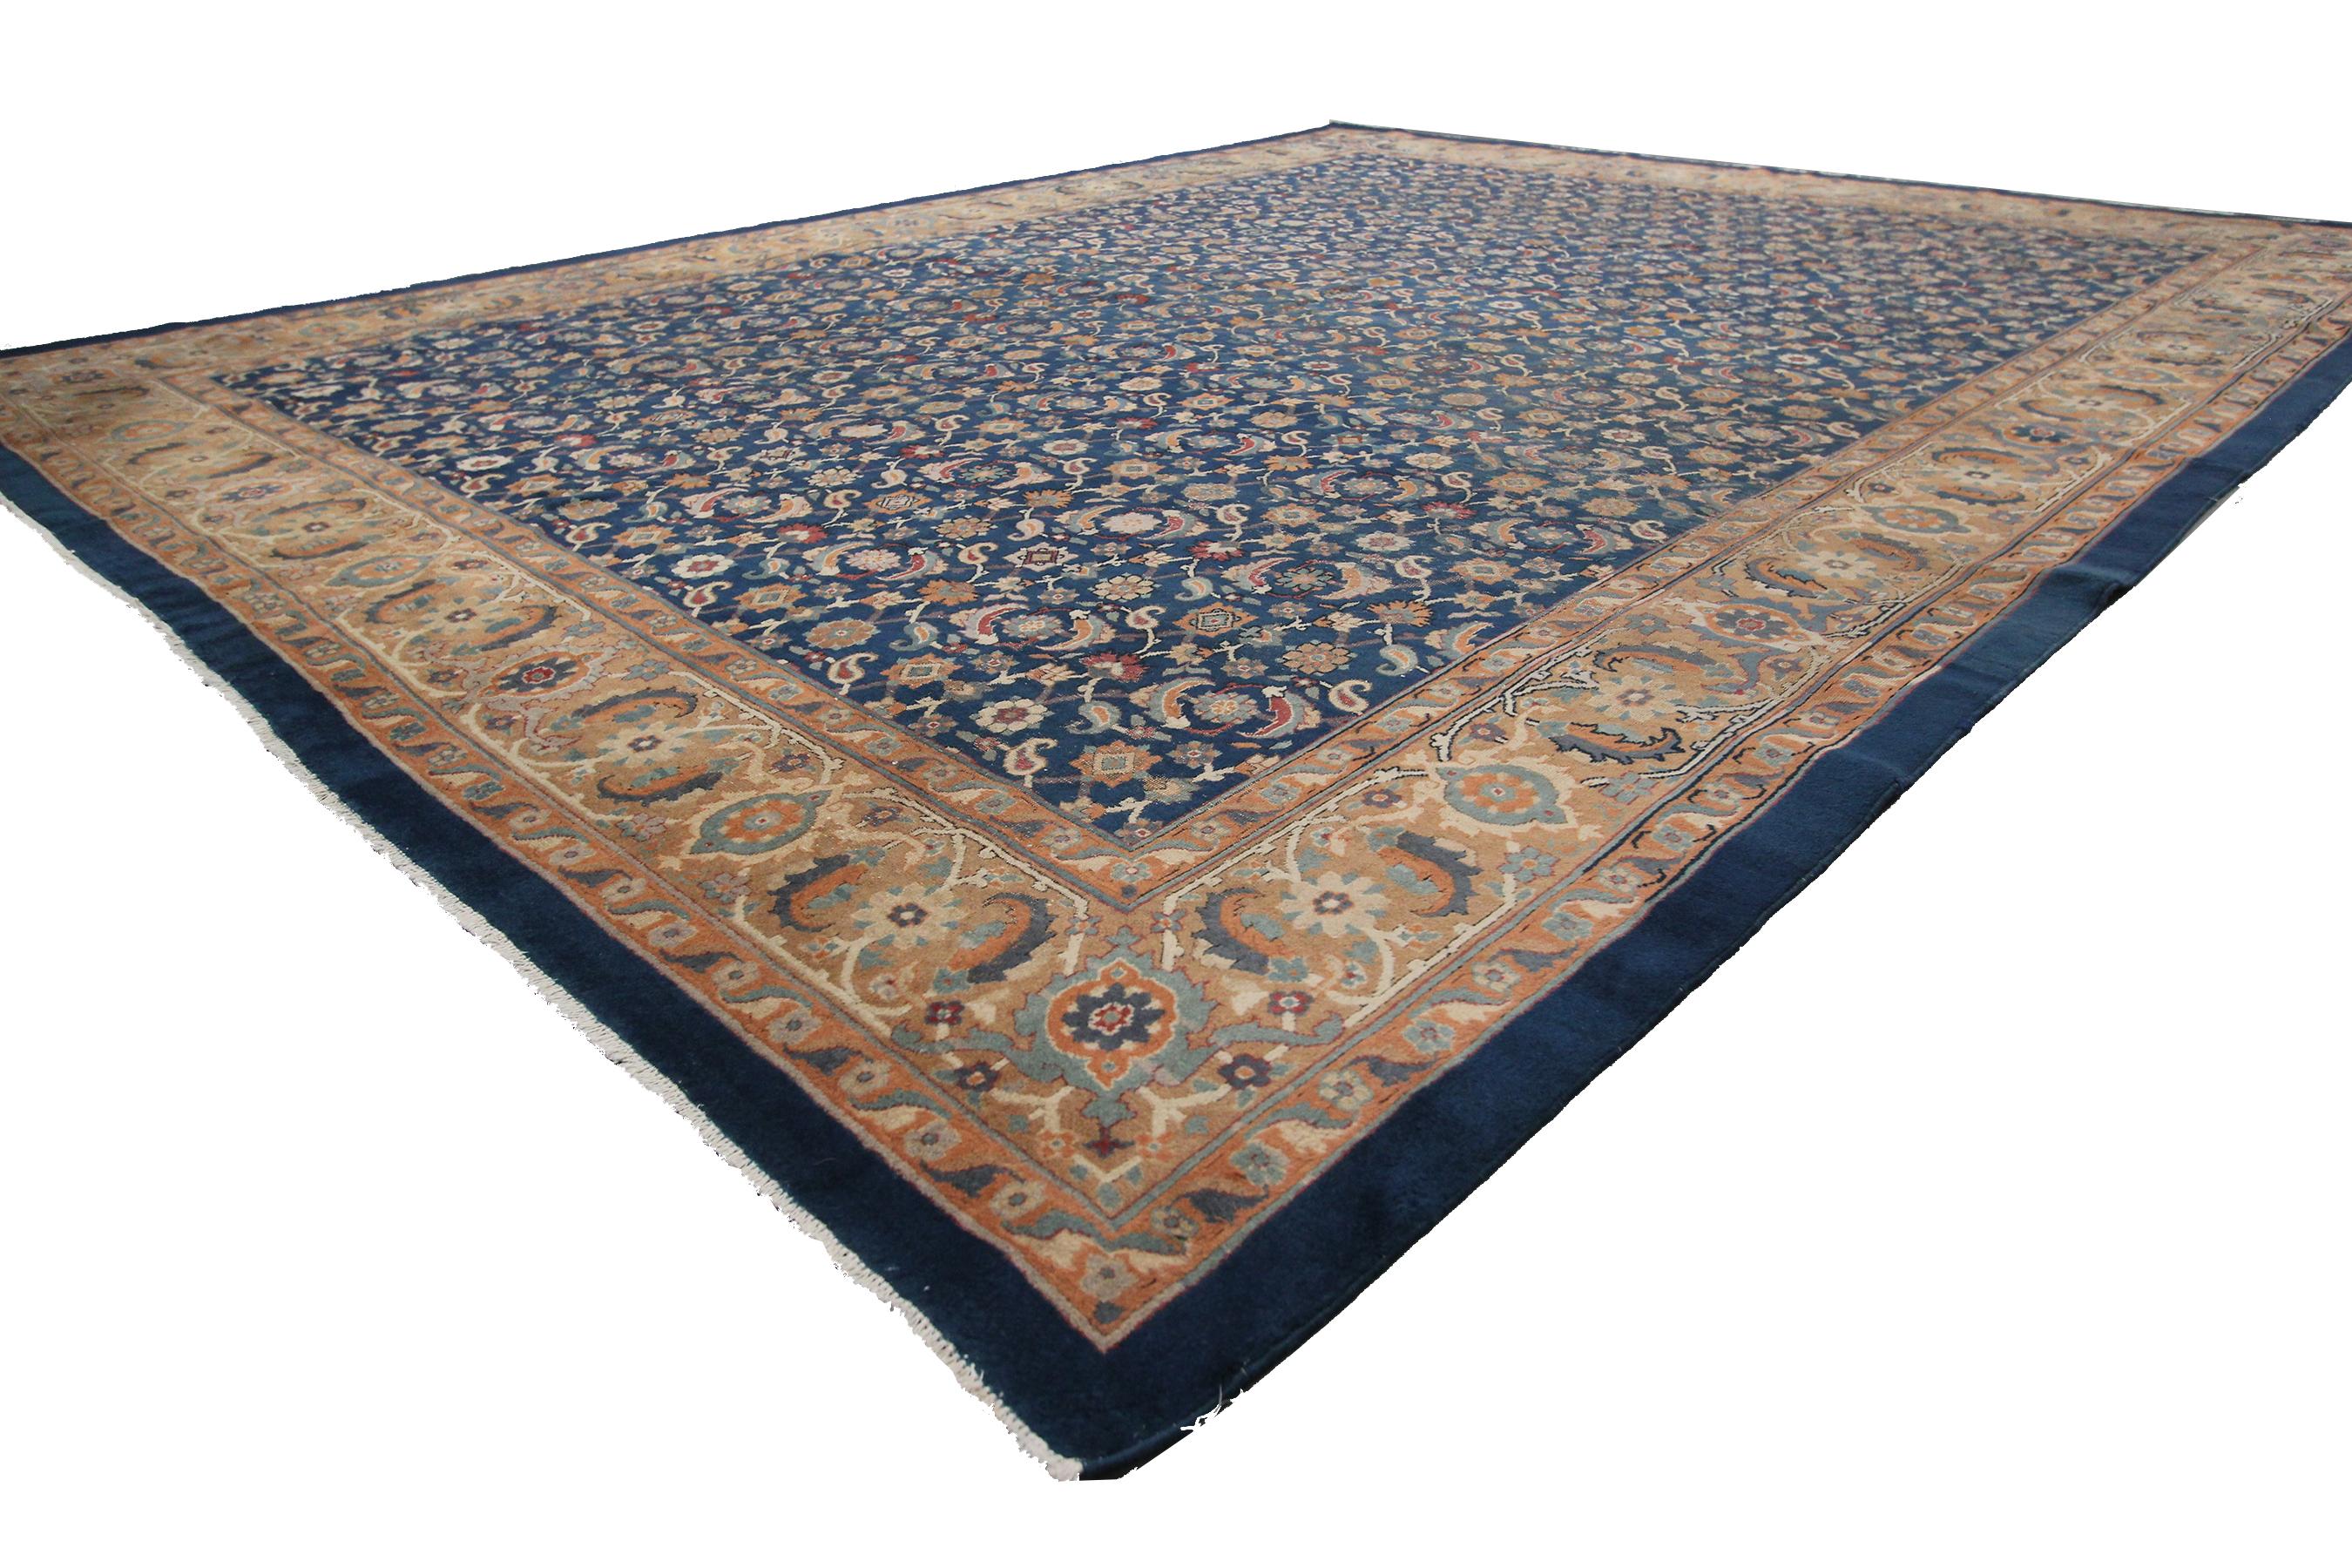 Hand-Knotted 1890 Antique Agra Rug Antique Agra Amritsar Handmade Agra Rug Geometric For Sale